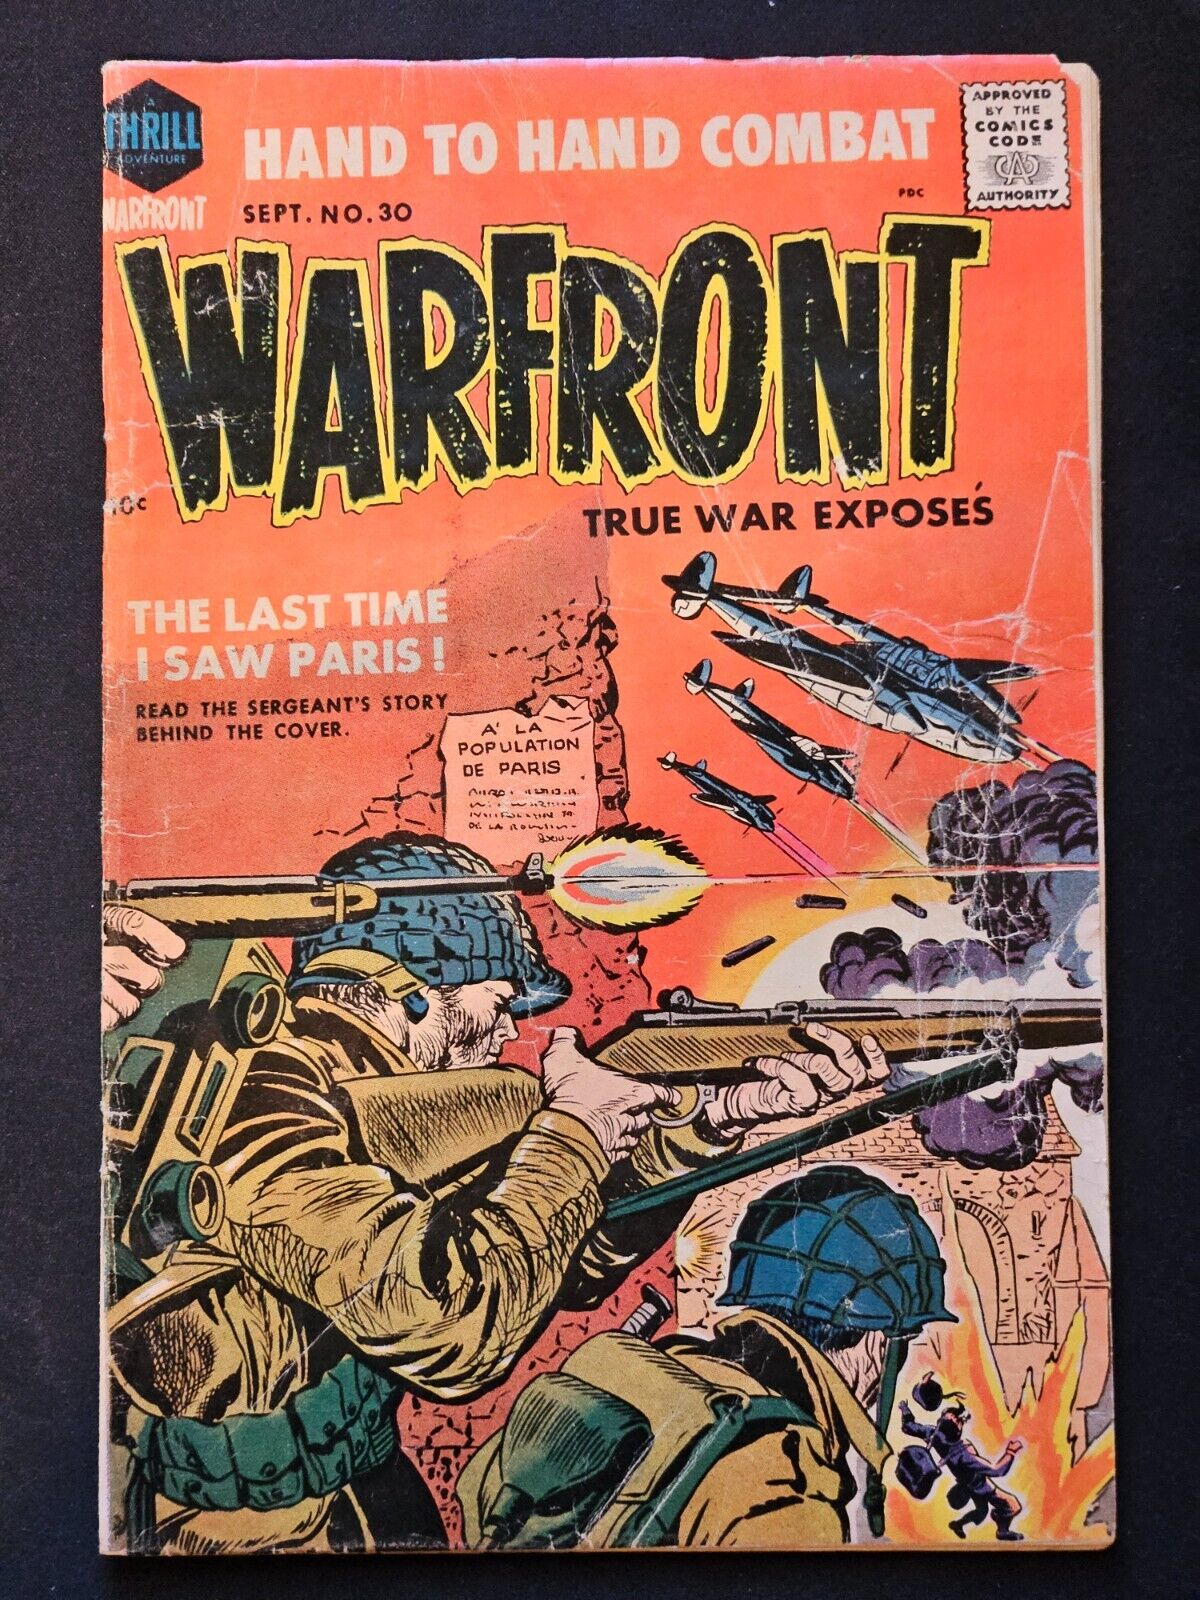 Warfront issue #30 (1956, Harvey / Thrill) Jack Kirby cover Tales of Combat Pics